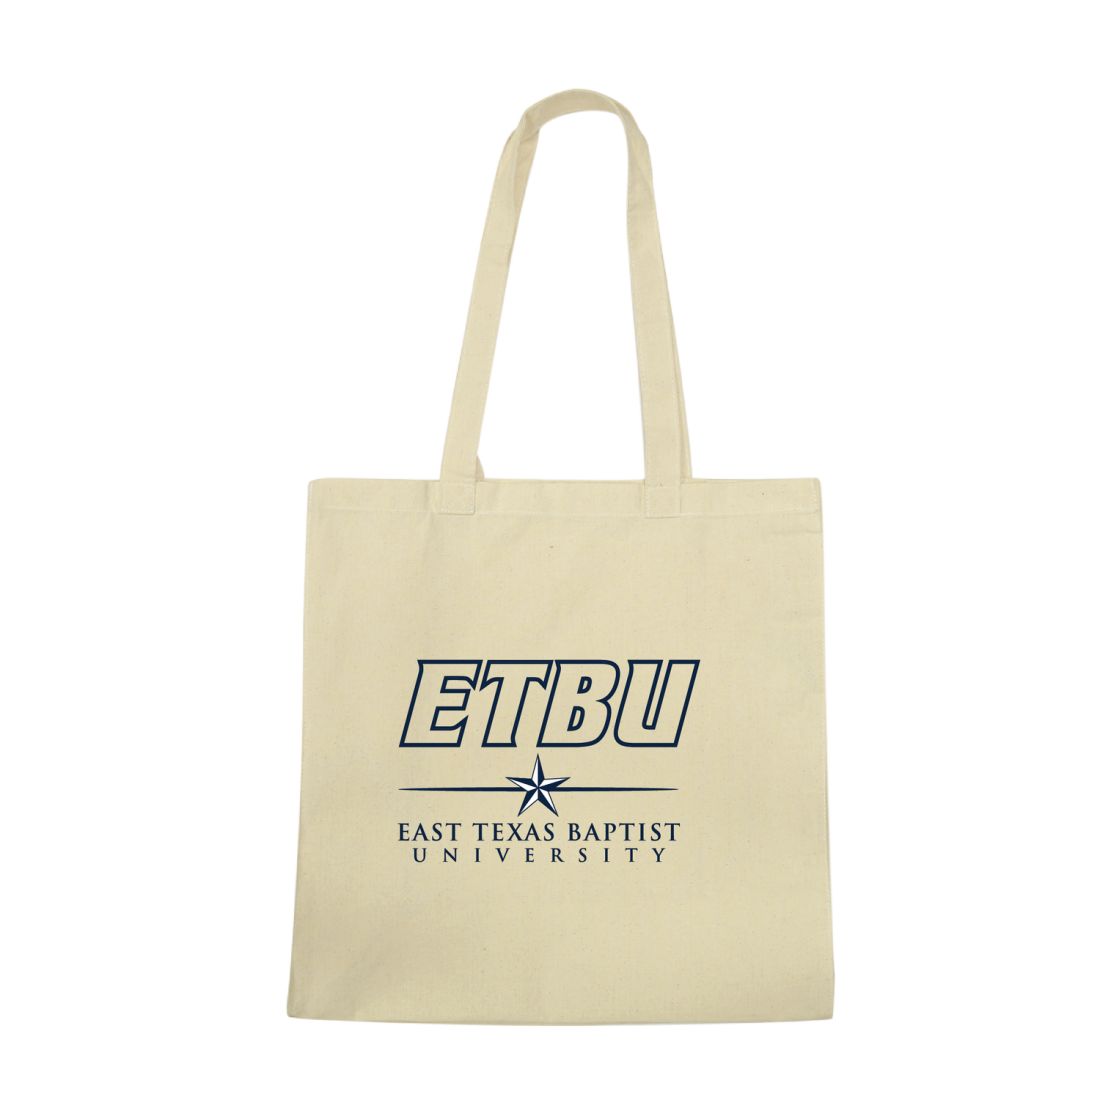 East Texas Baptist University Tigers Institutional Tote Bag